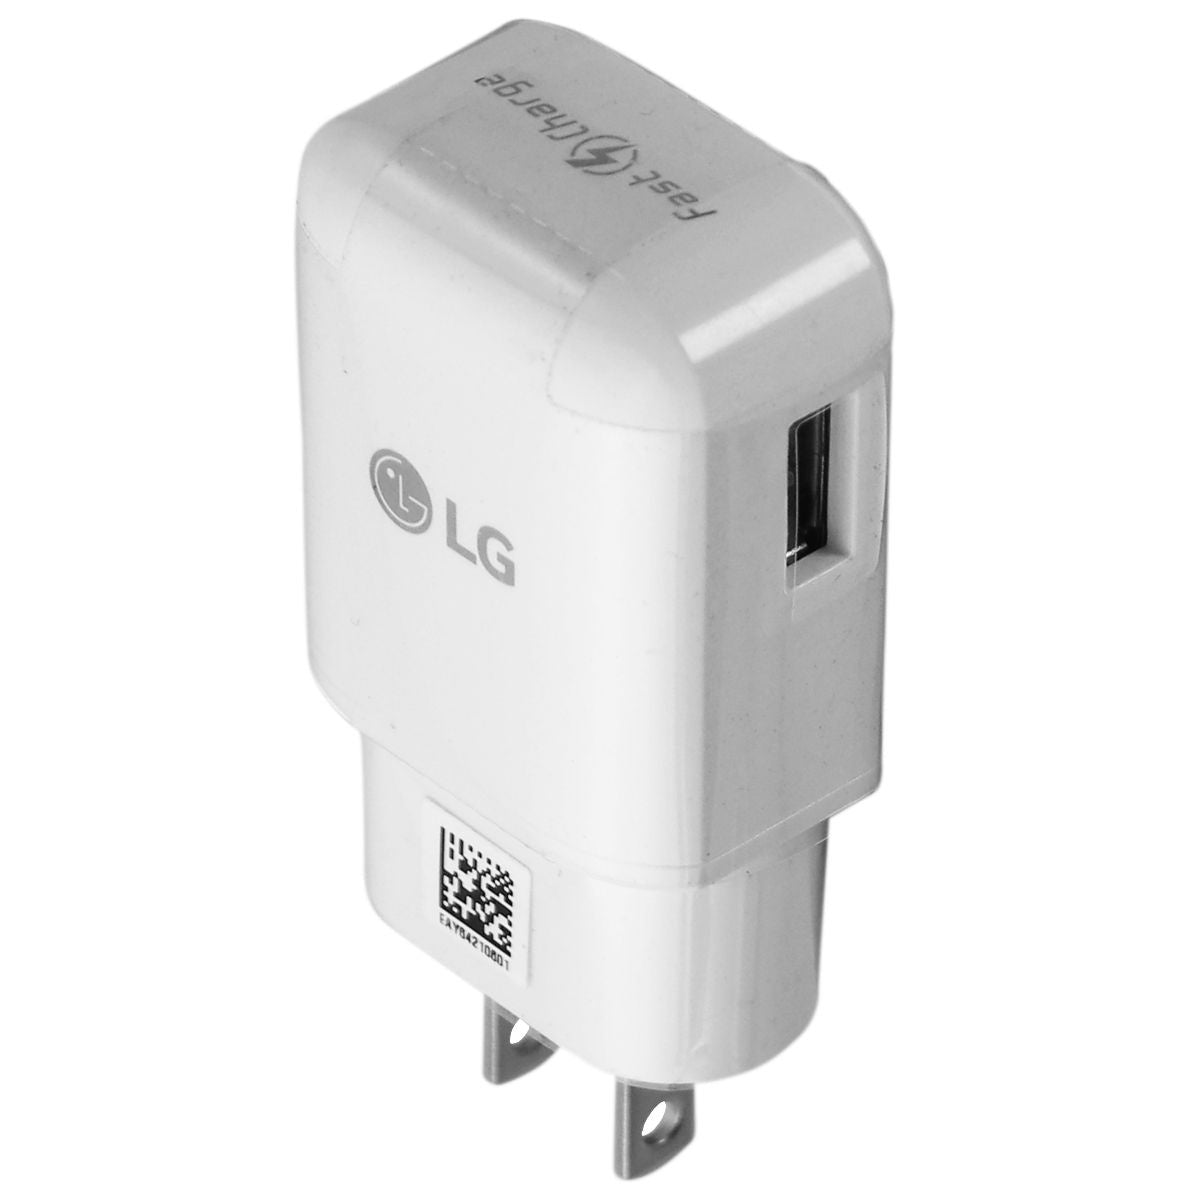 LG Fast Charge (5V/9V) Single USB Wall Charger/Adapter - White (MCS-H05W/ED) Cell Phone - Cables & Adapters LG    - Simple Cell Bulk Wholesale Pricing - USA Seller